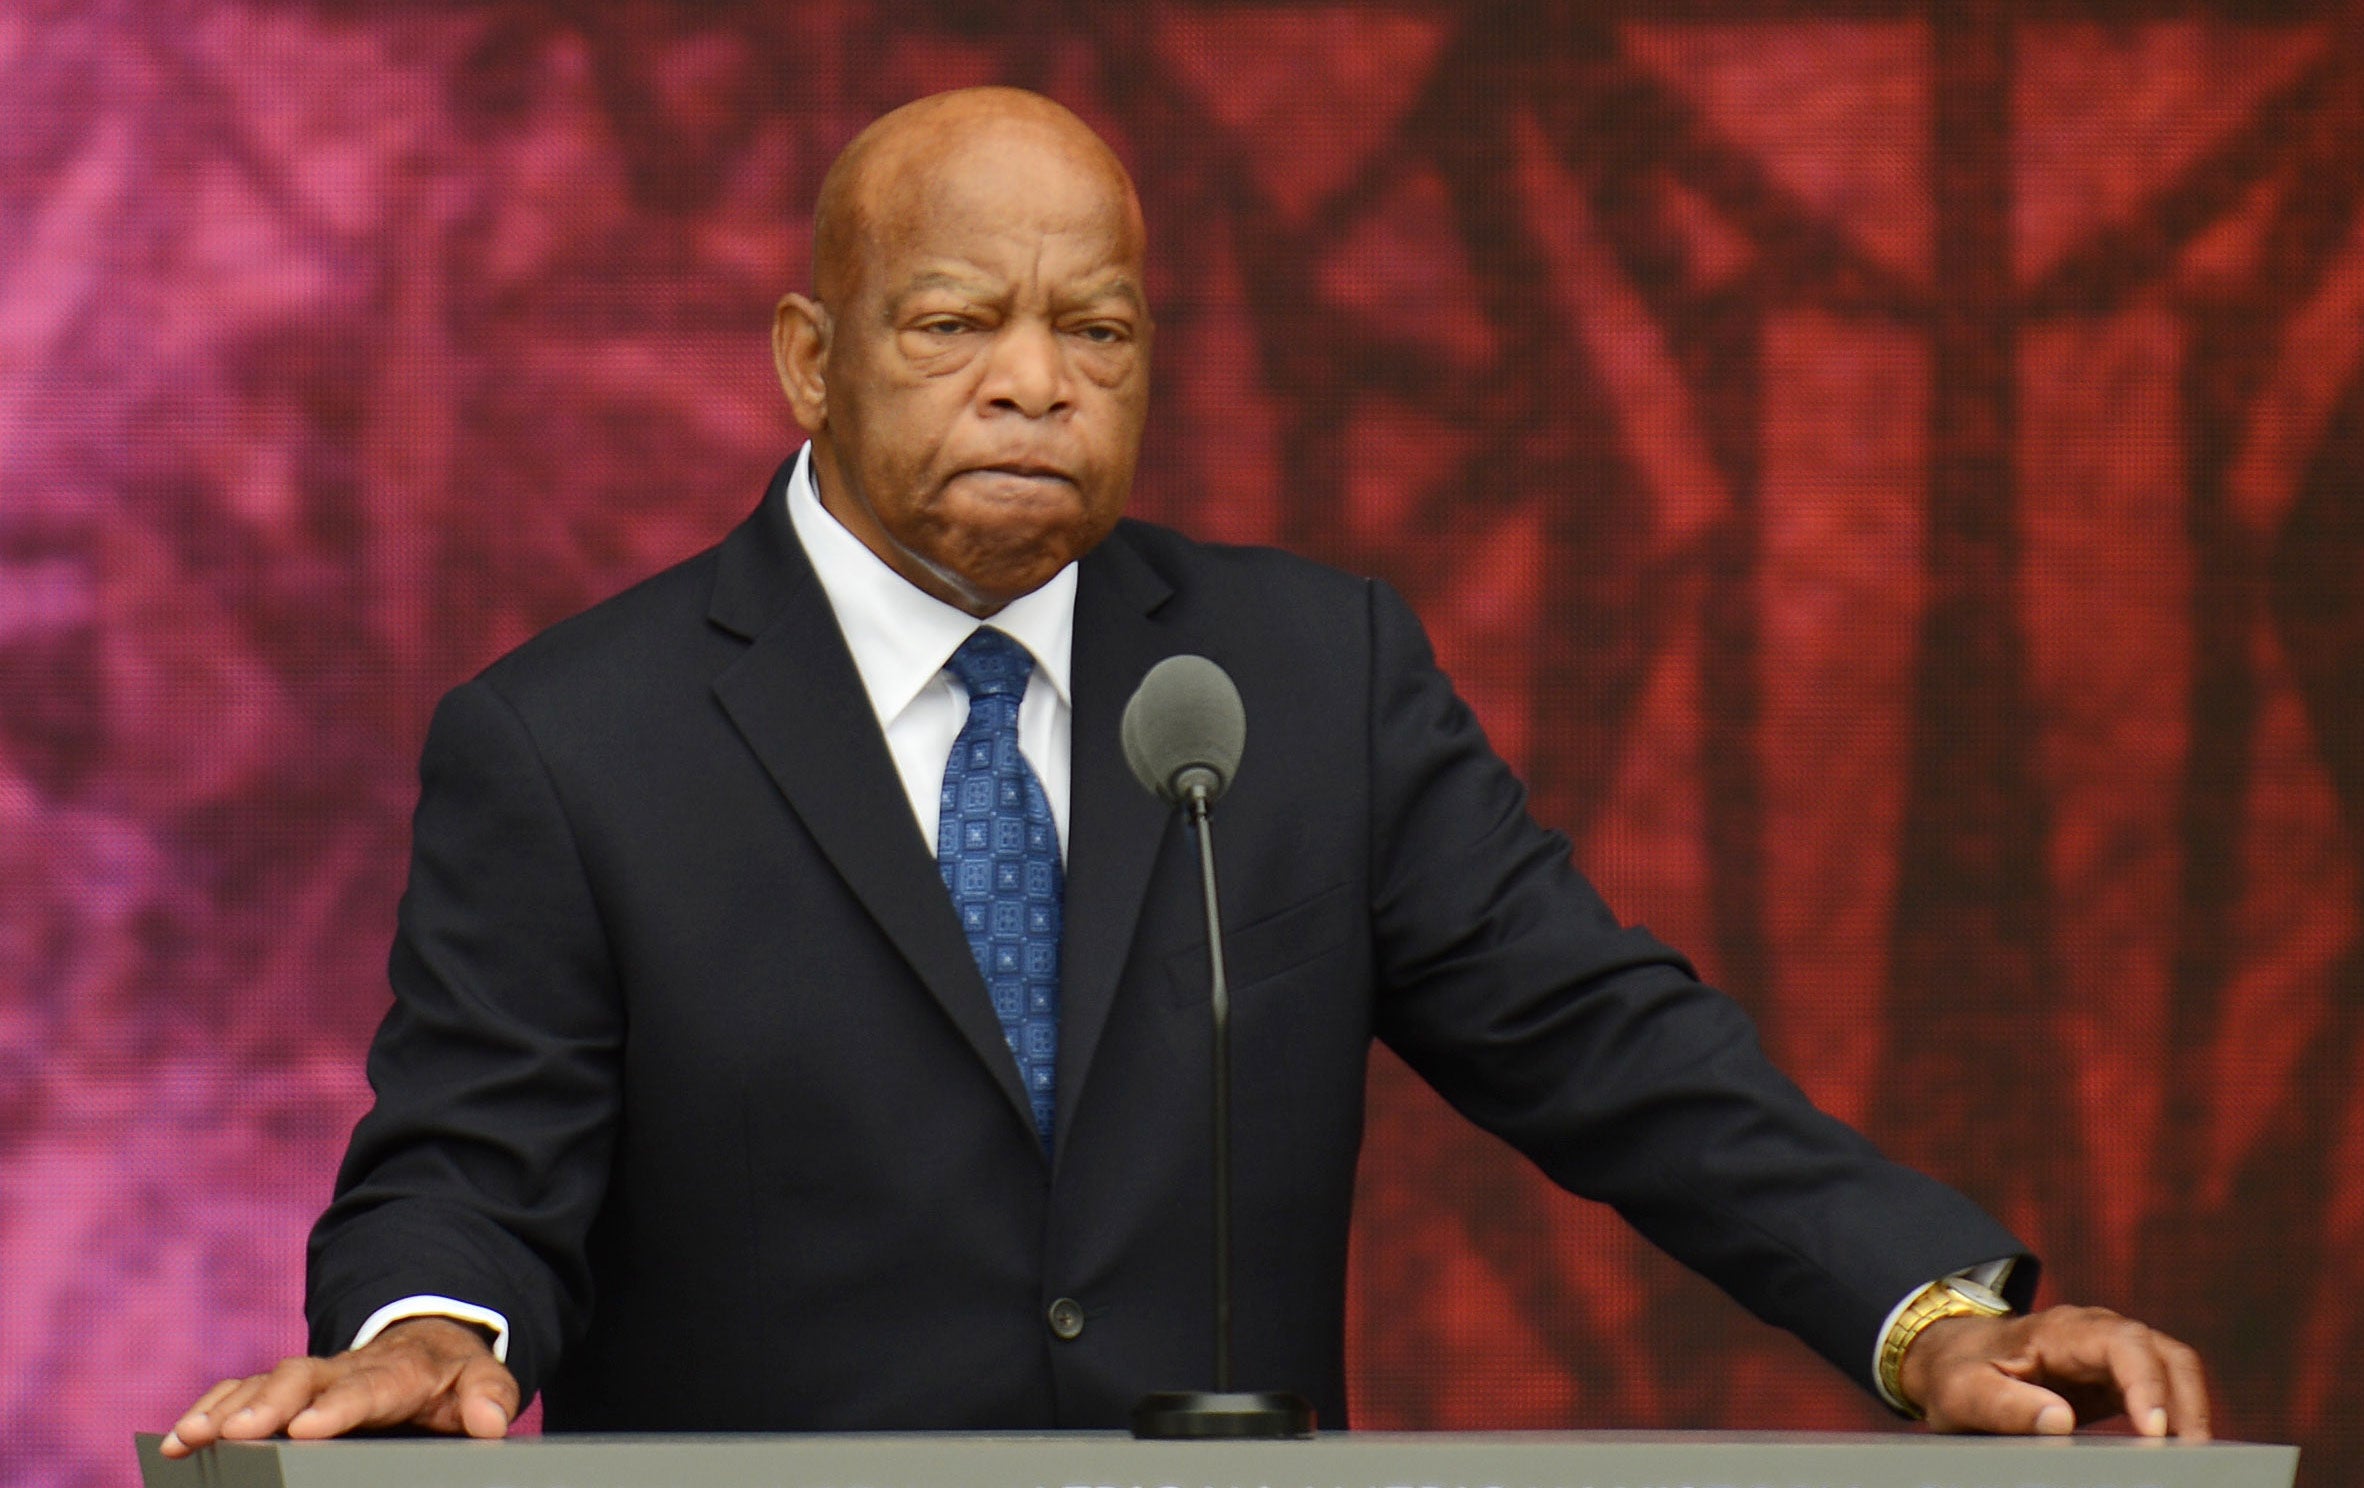 Civil Rights Icon John Lewis Attacked By Donald Trump During MLK Weekend
